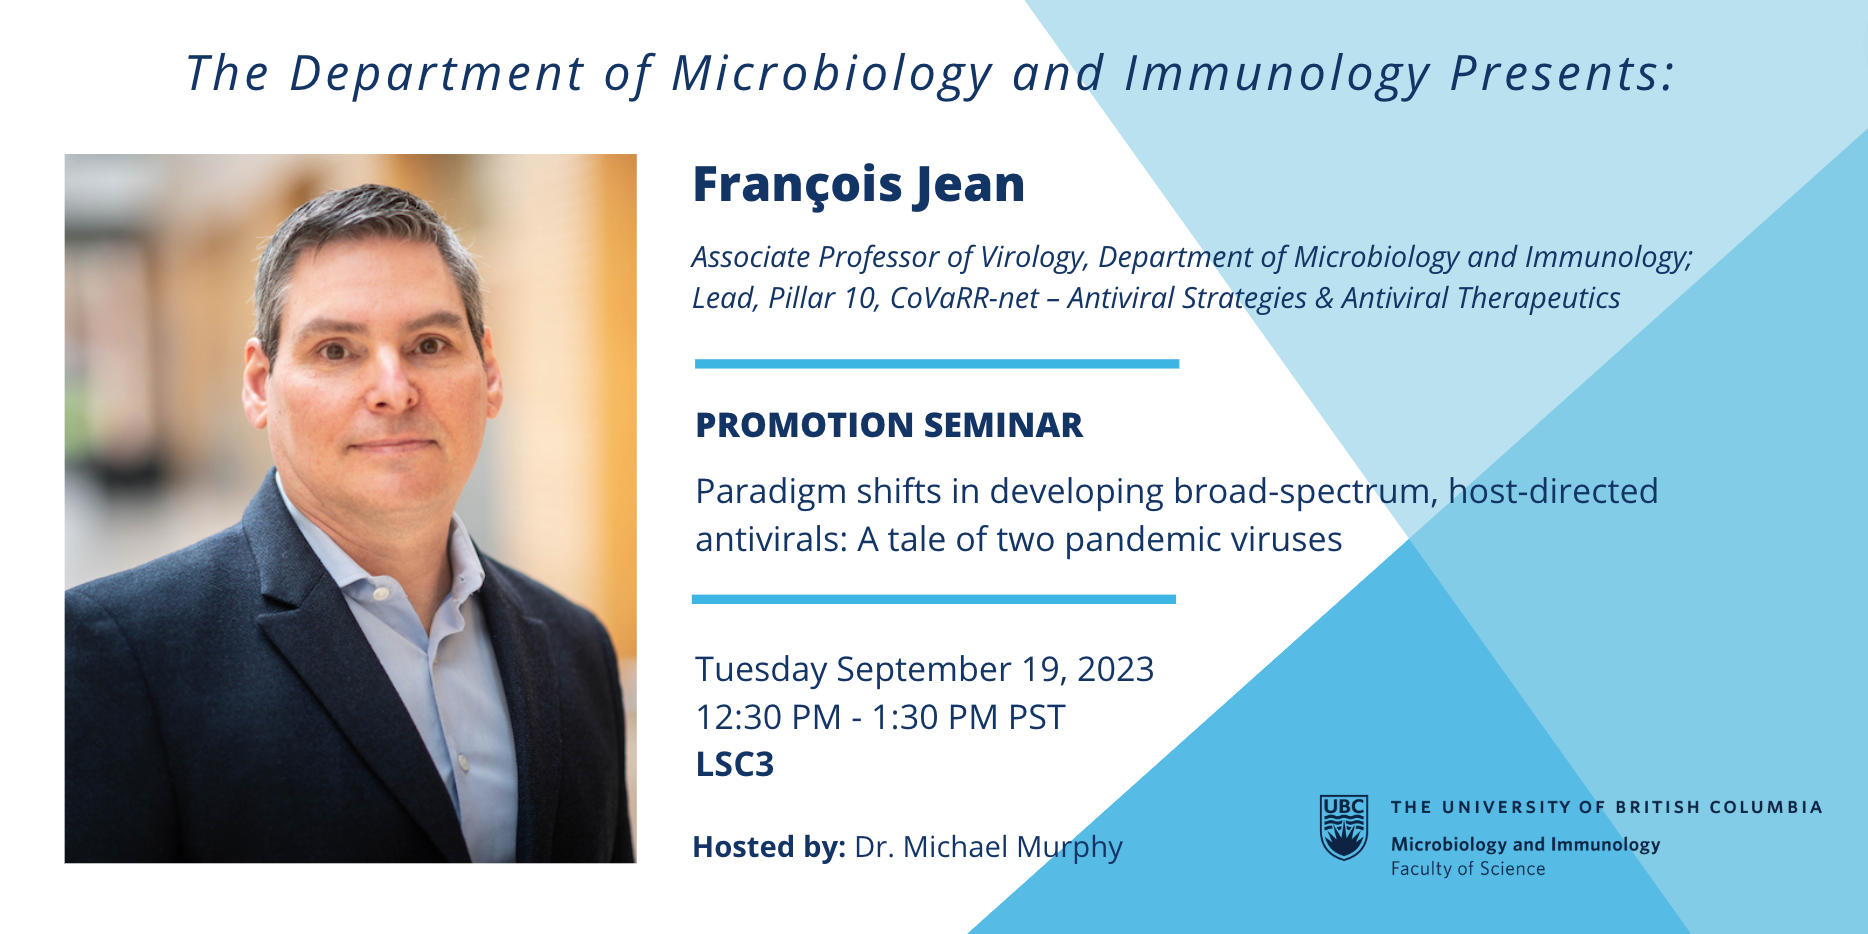 Poster promotion for Francois Jean's seminar including photo, time, location, and title.